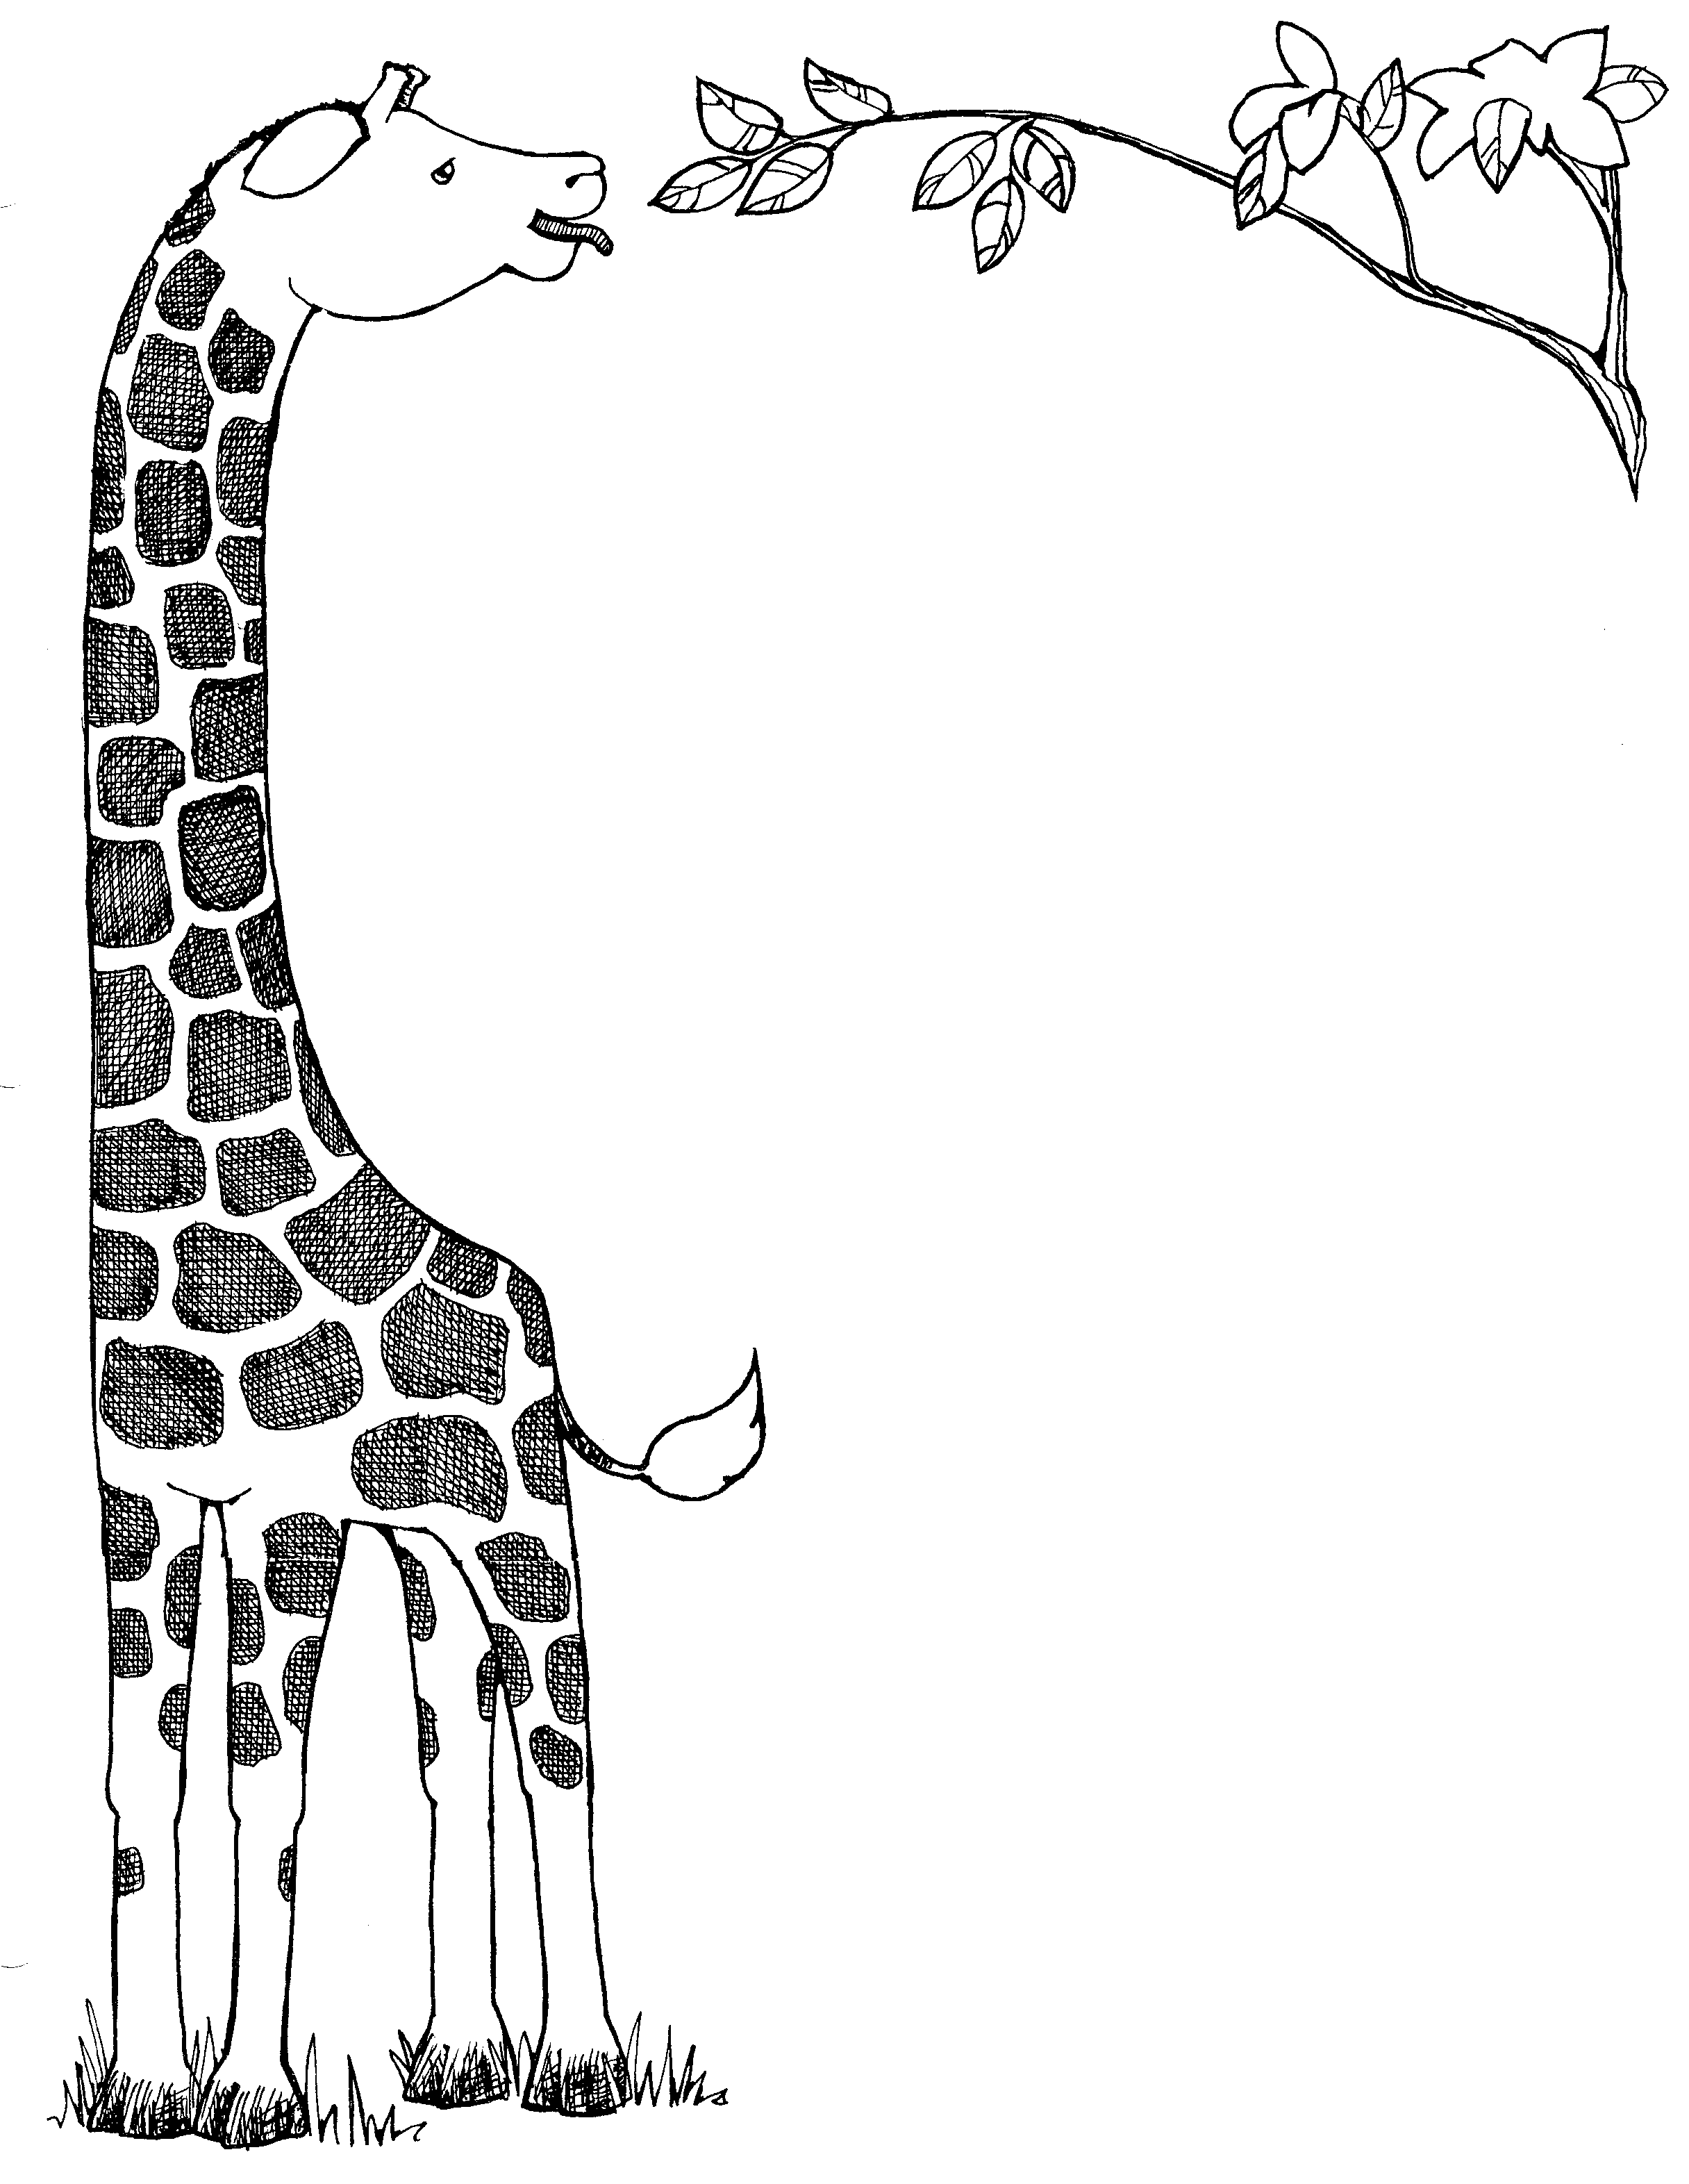 15 Black   White Giraffe Pictures   Free Cliparts That You Can